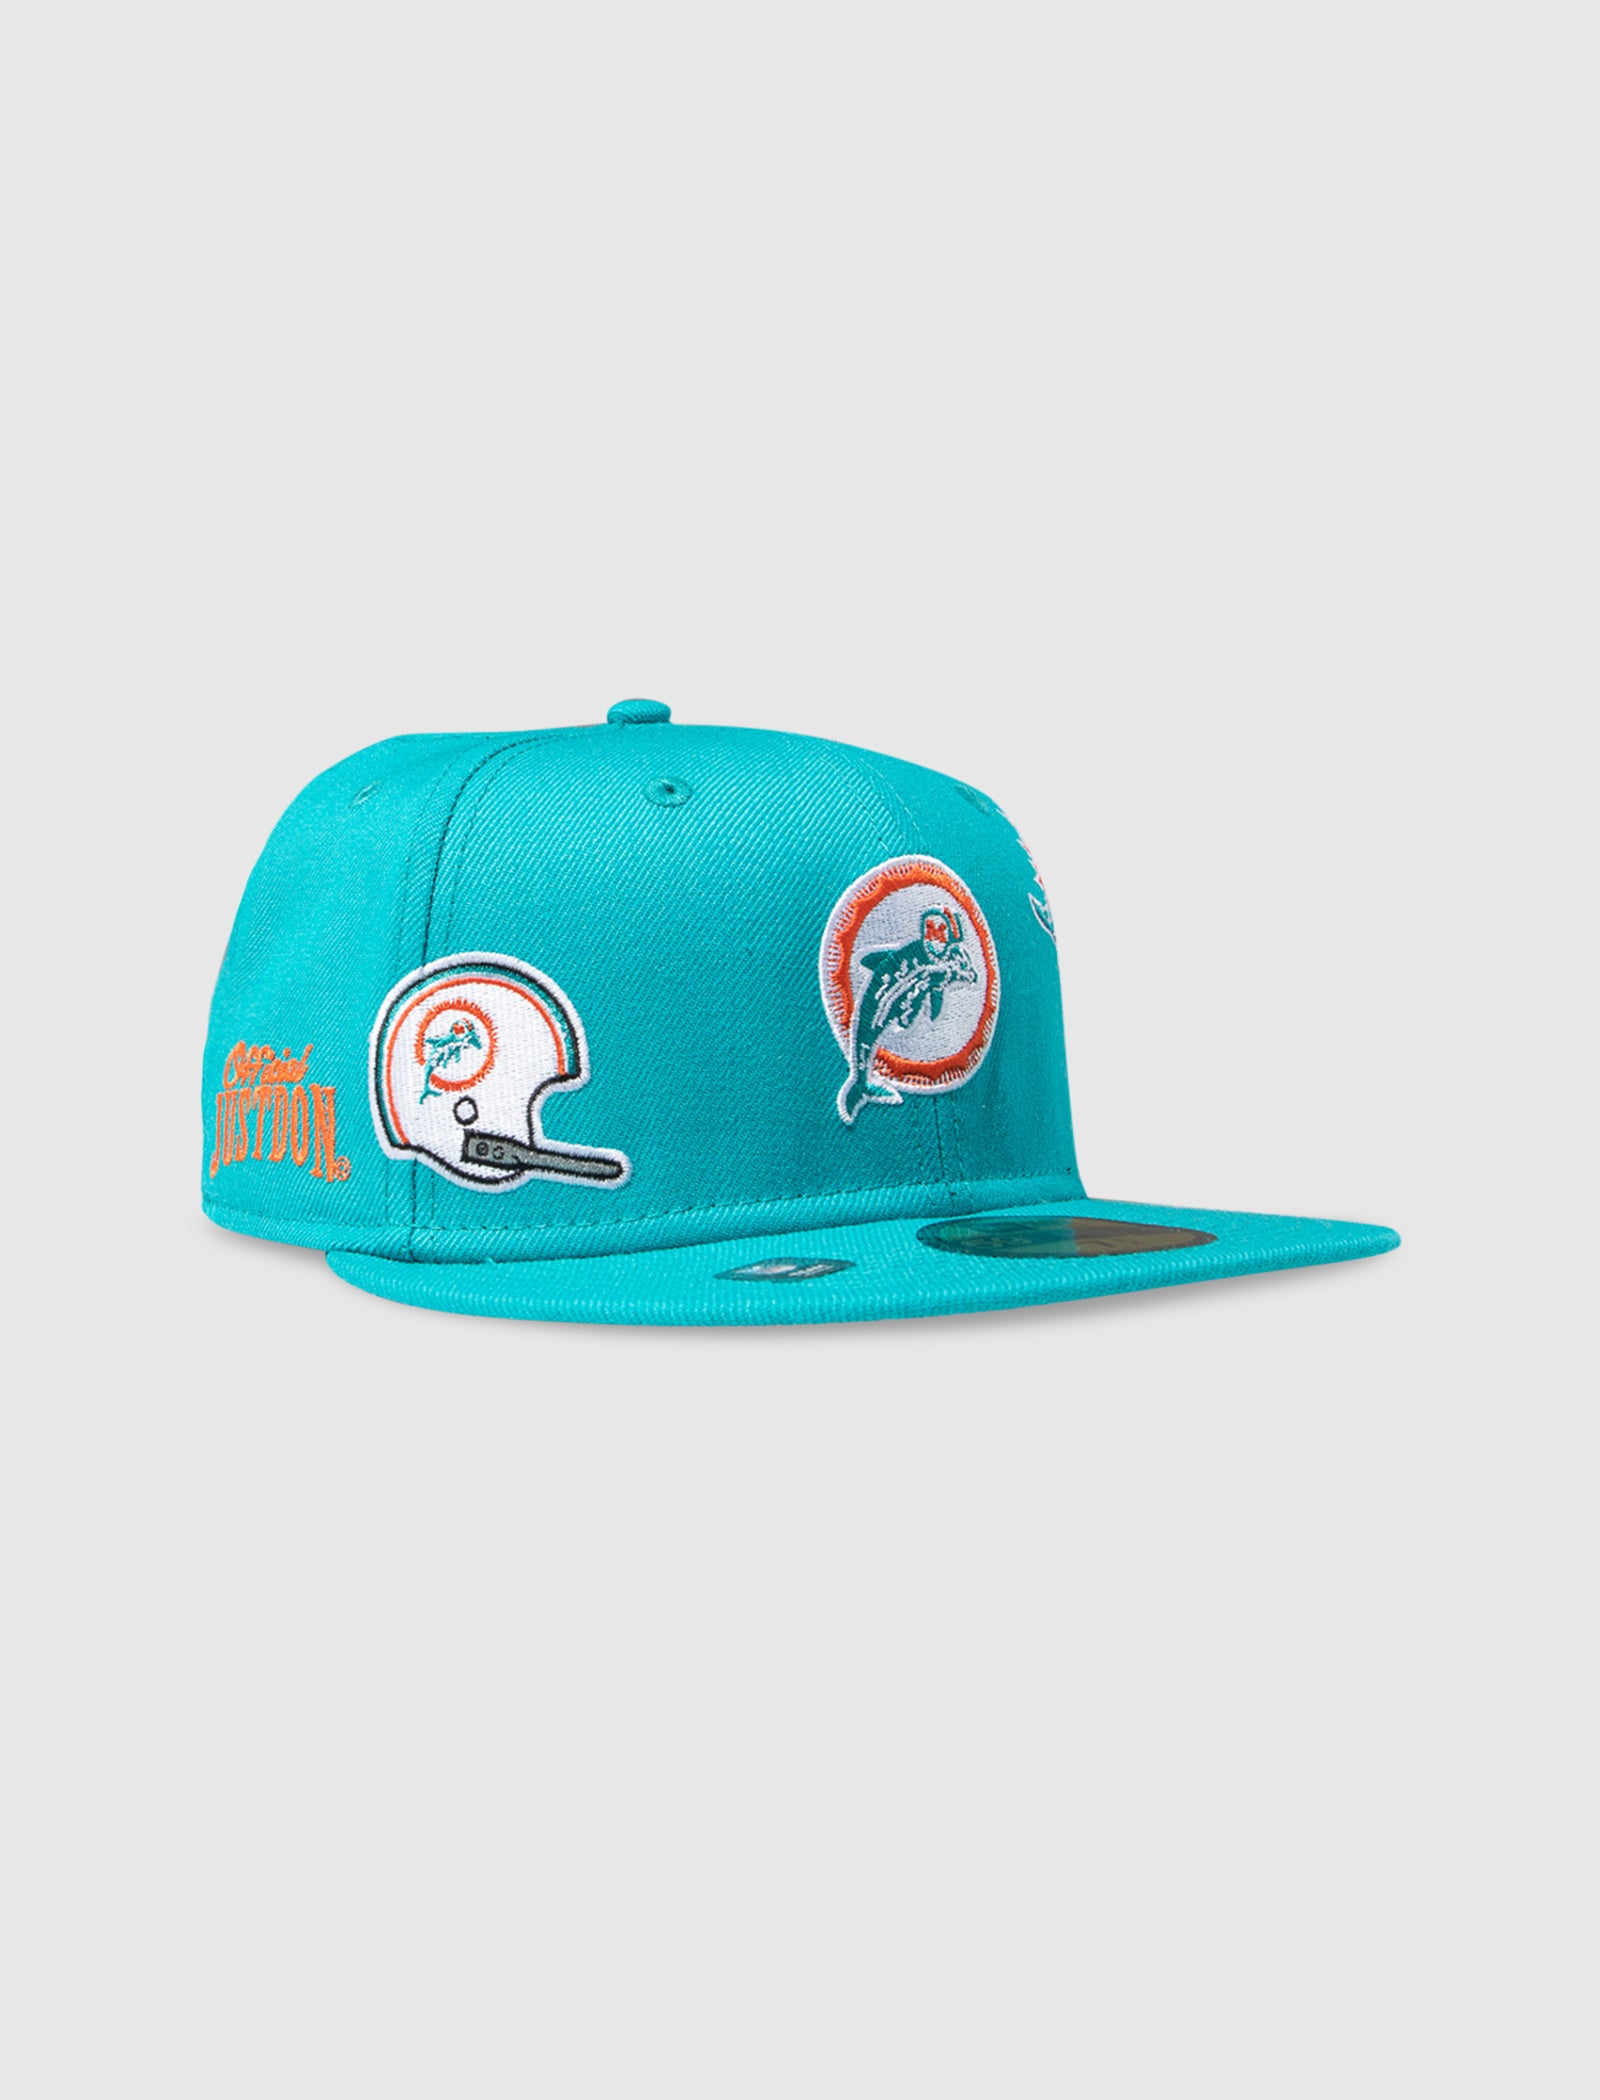 NEW ERA x JUST DON MIAMI DOLPHINS HAT